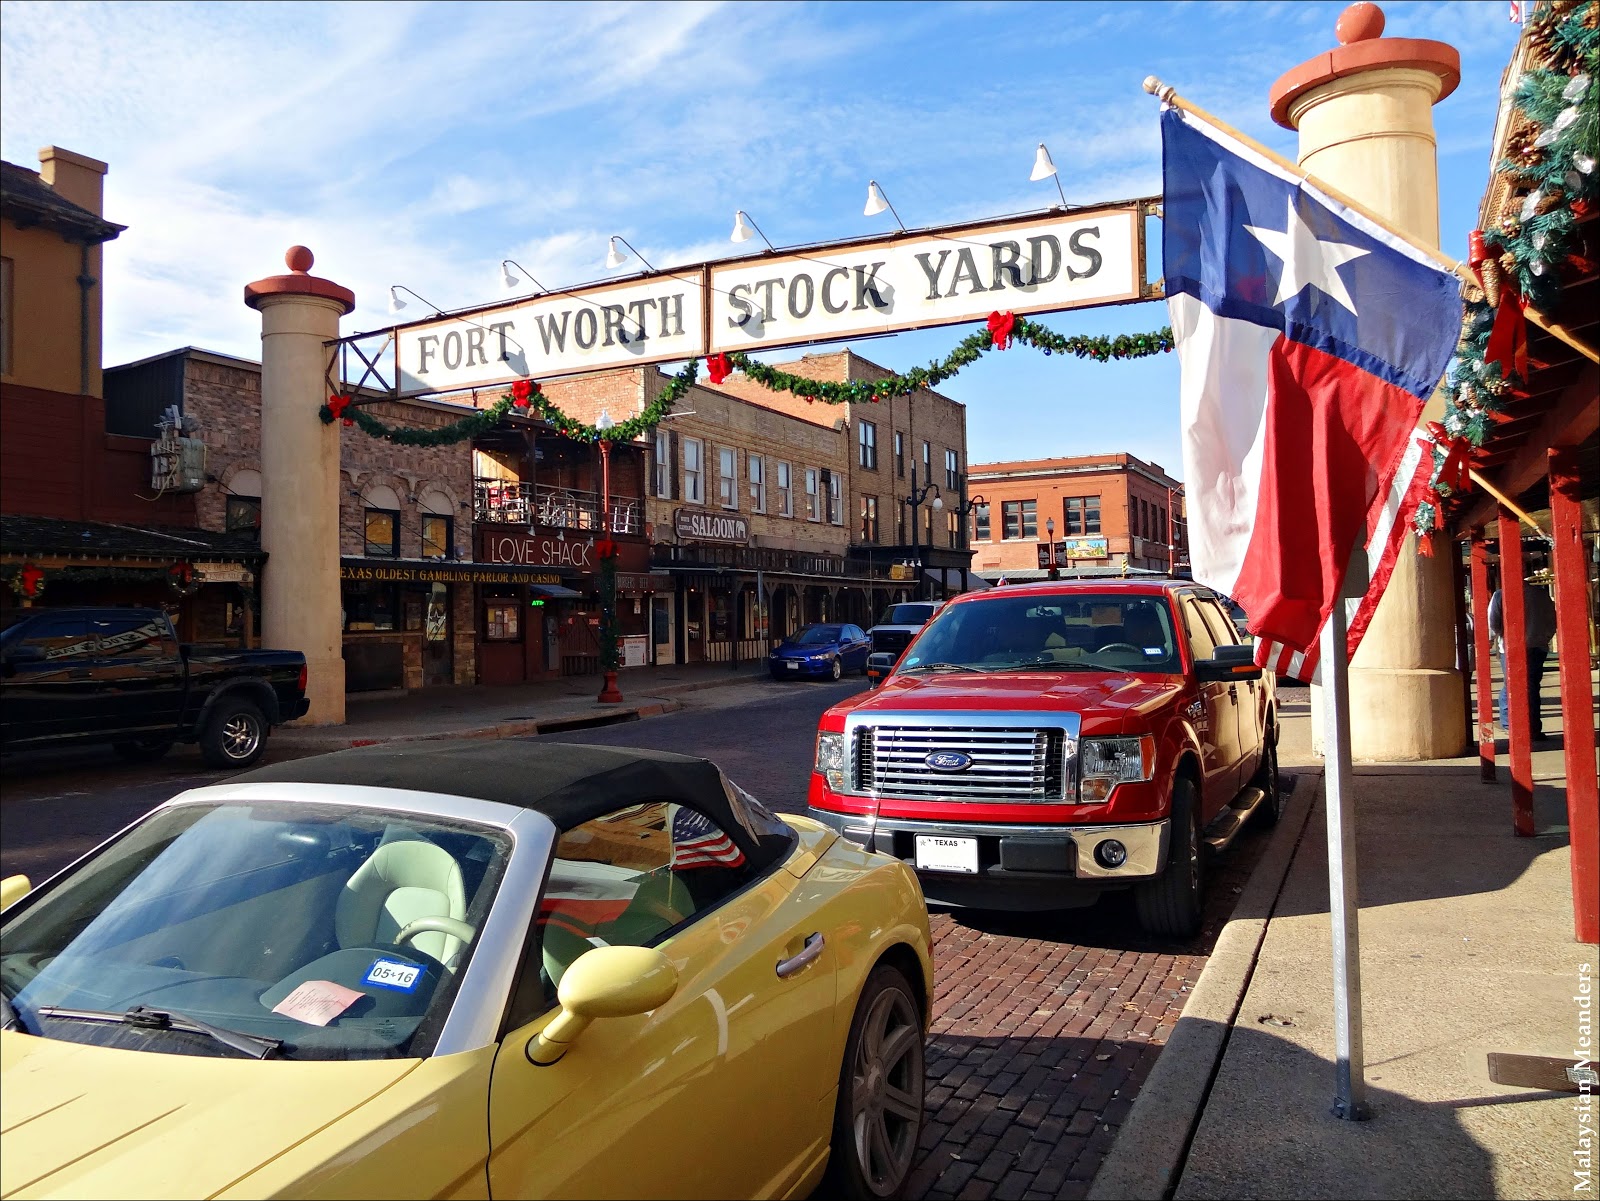 Fort Worth's Stockyards Is So Much More Than Cowboys and Cattle